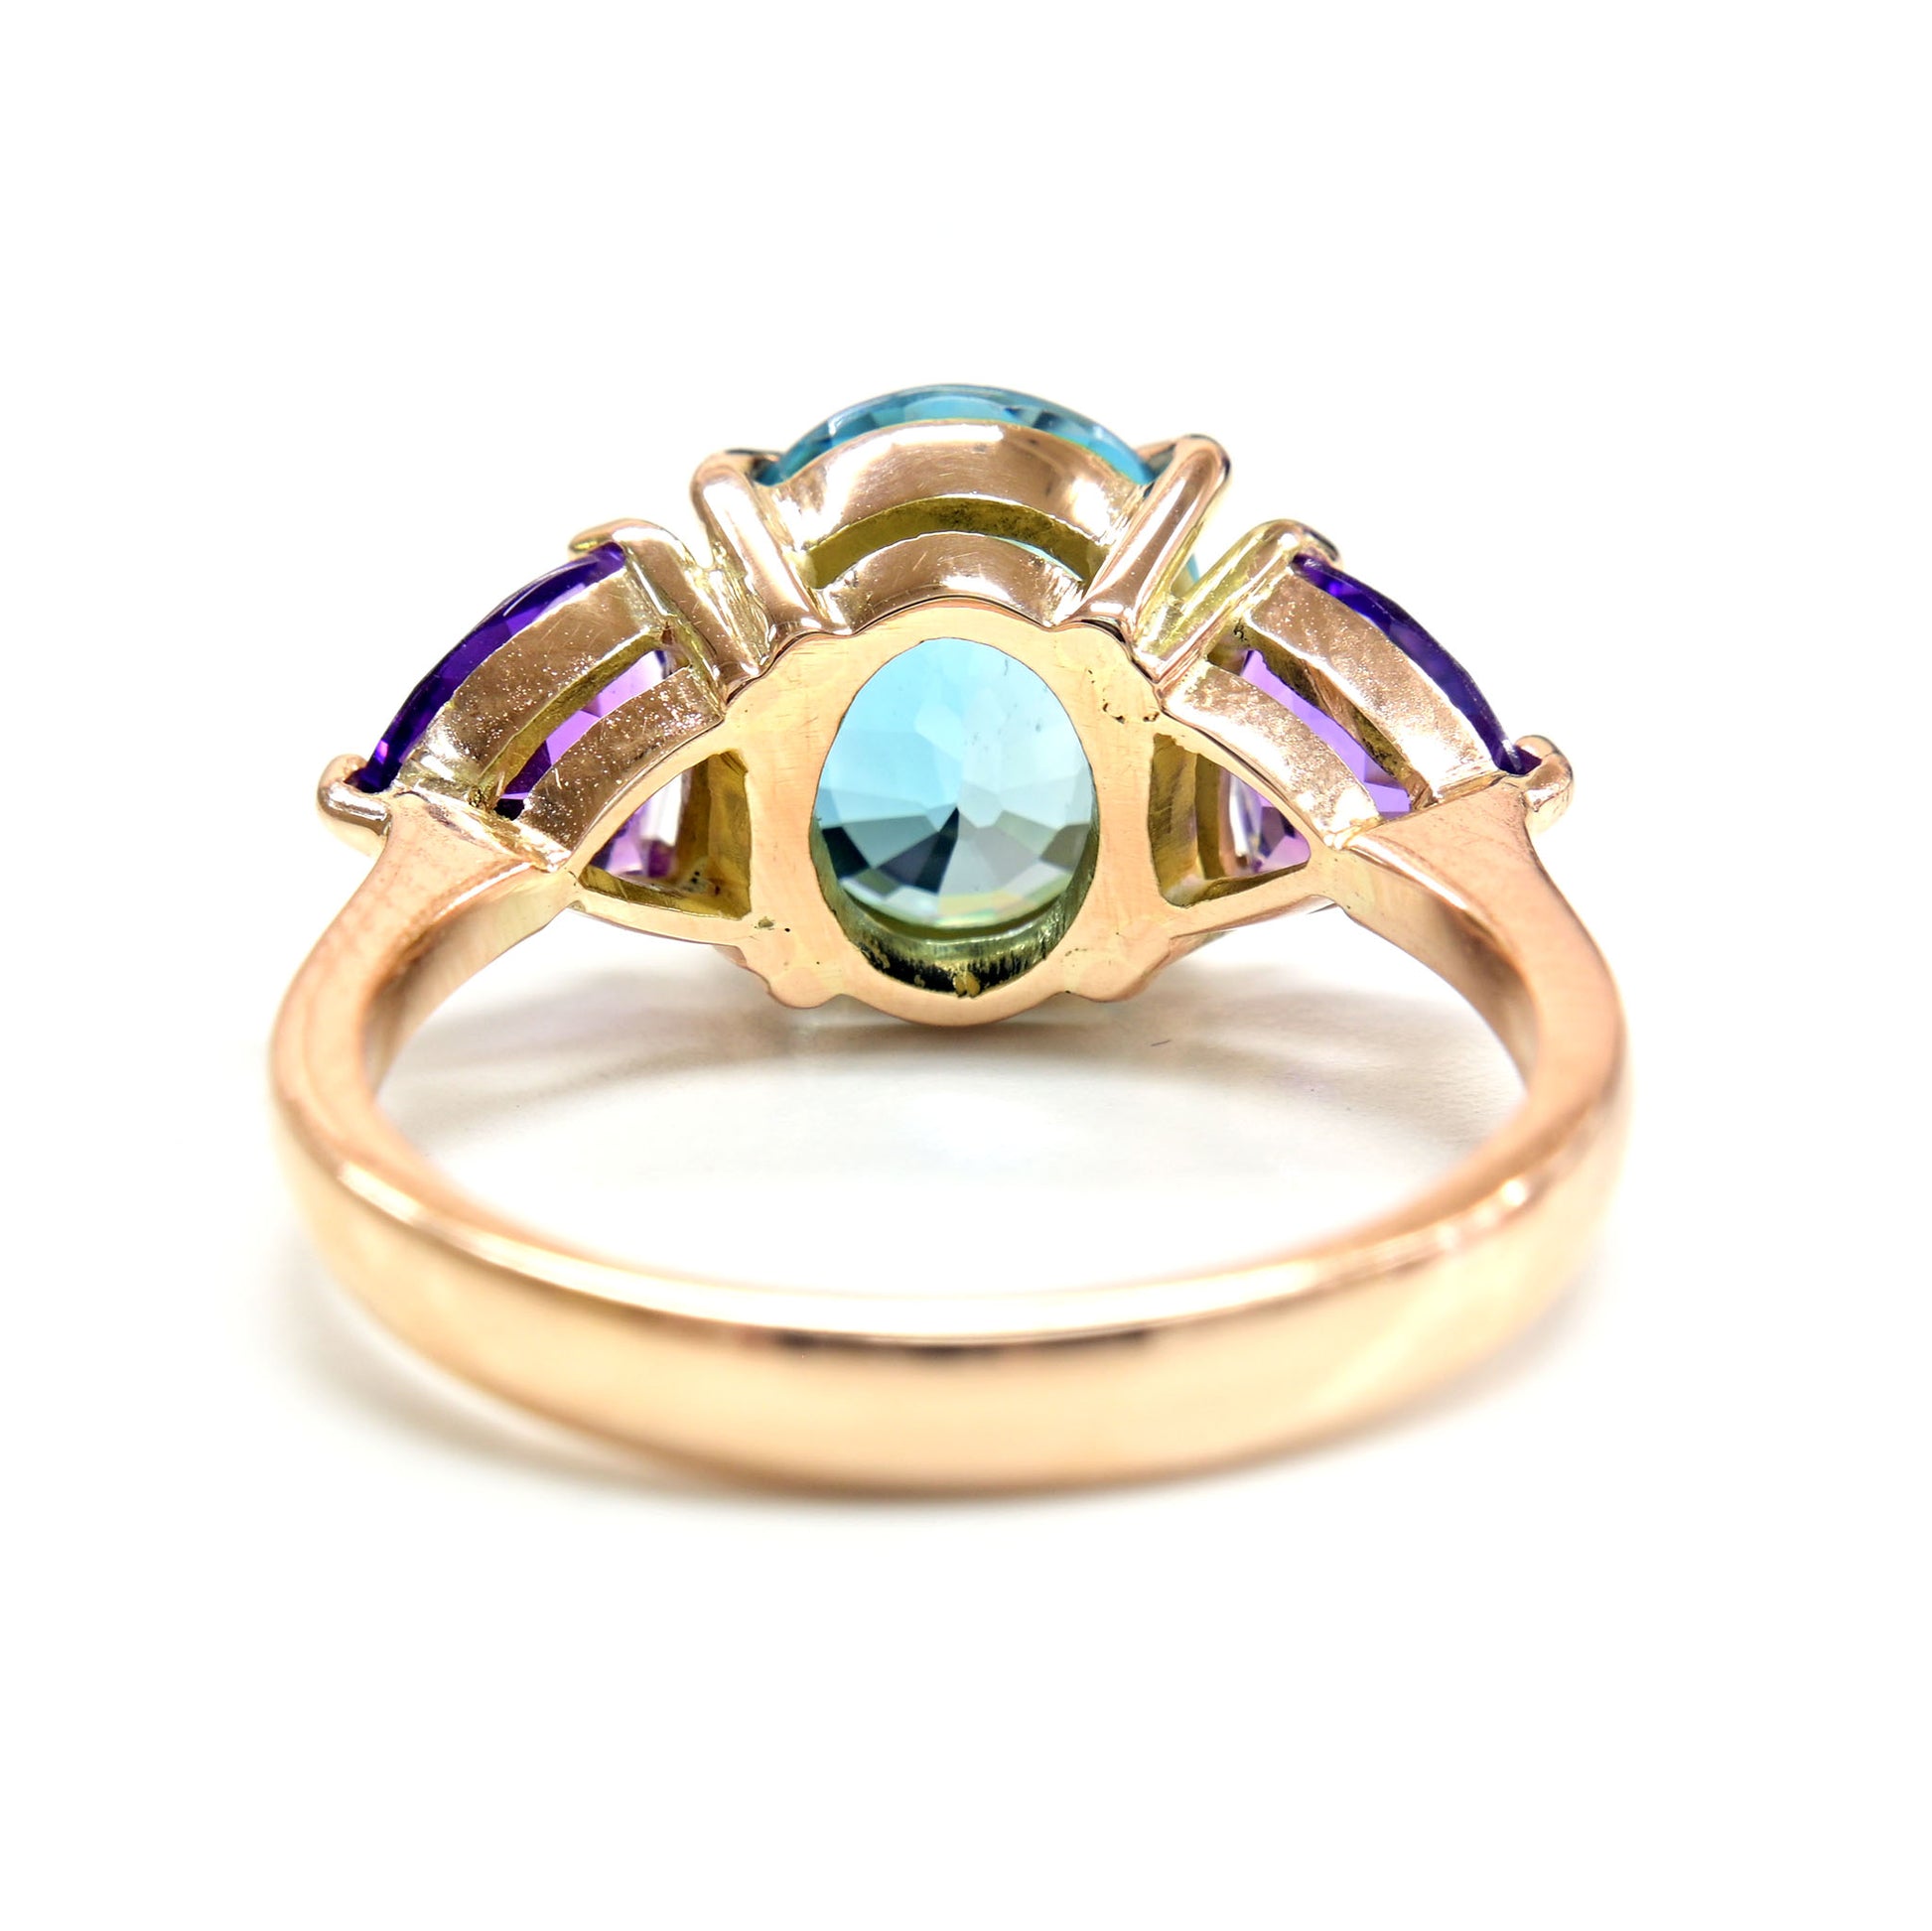 Back view of Thai blue zircon ring